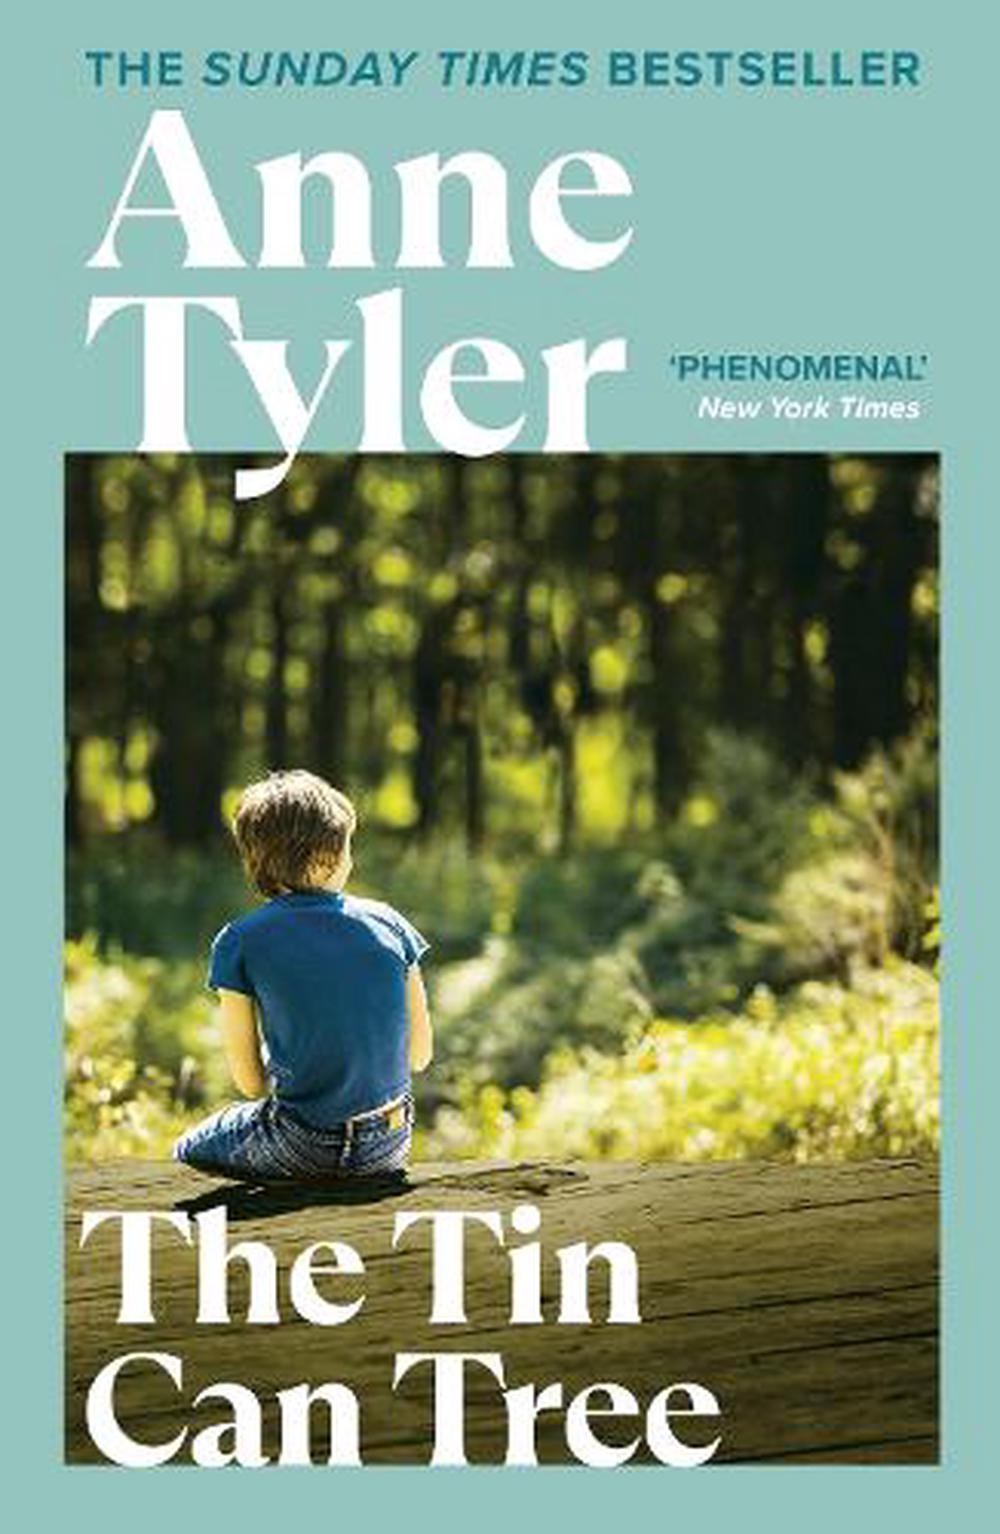 Can　Tin　online　at　Tyler,　Nile　The　Anne　Paperback,　The　Tree　Buy　by　9780099337003